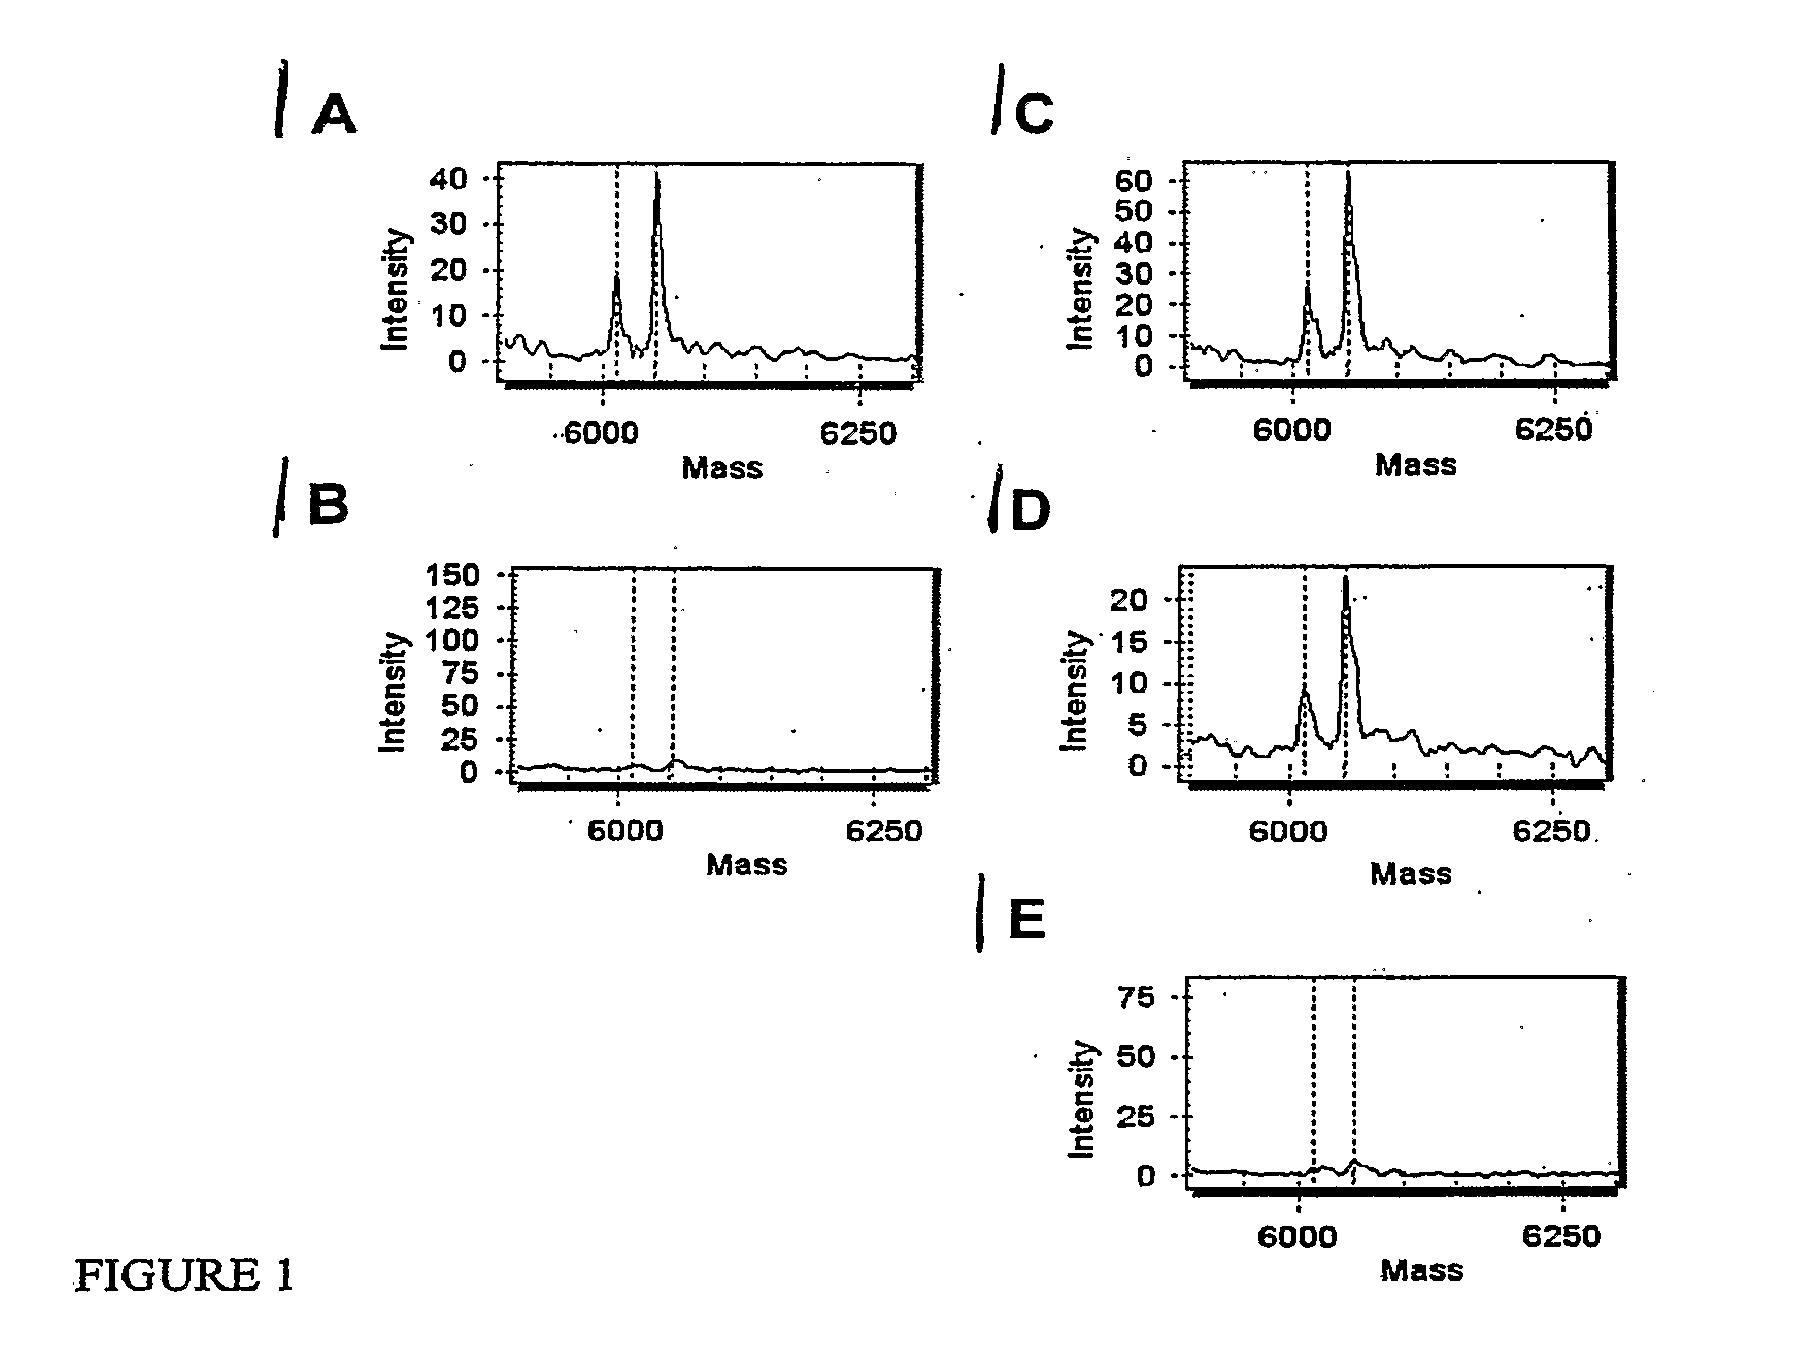 Method for detecting and quantifying rare mutations/polymorphisms